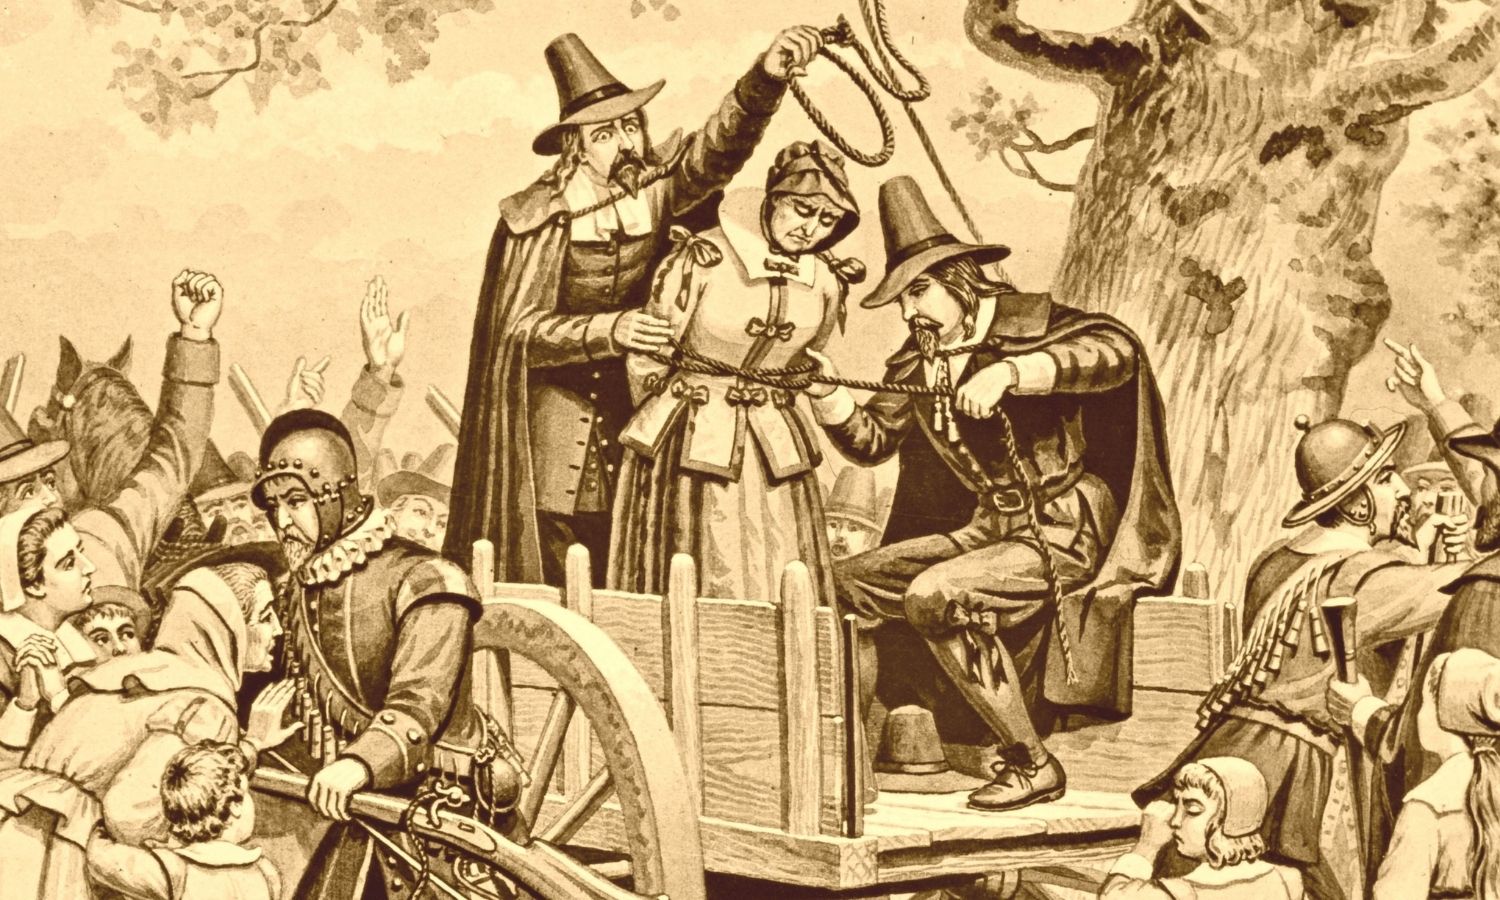 OTD in 1692: Innocent Bridget Bishop was the first person to be trialed and hung for witchcraft in Massachusetts